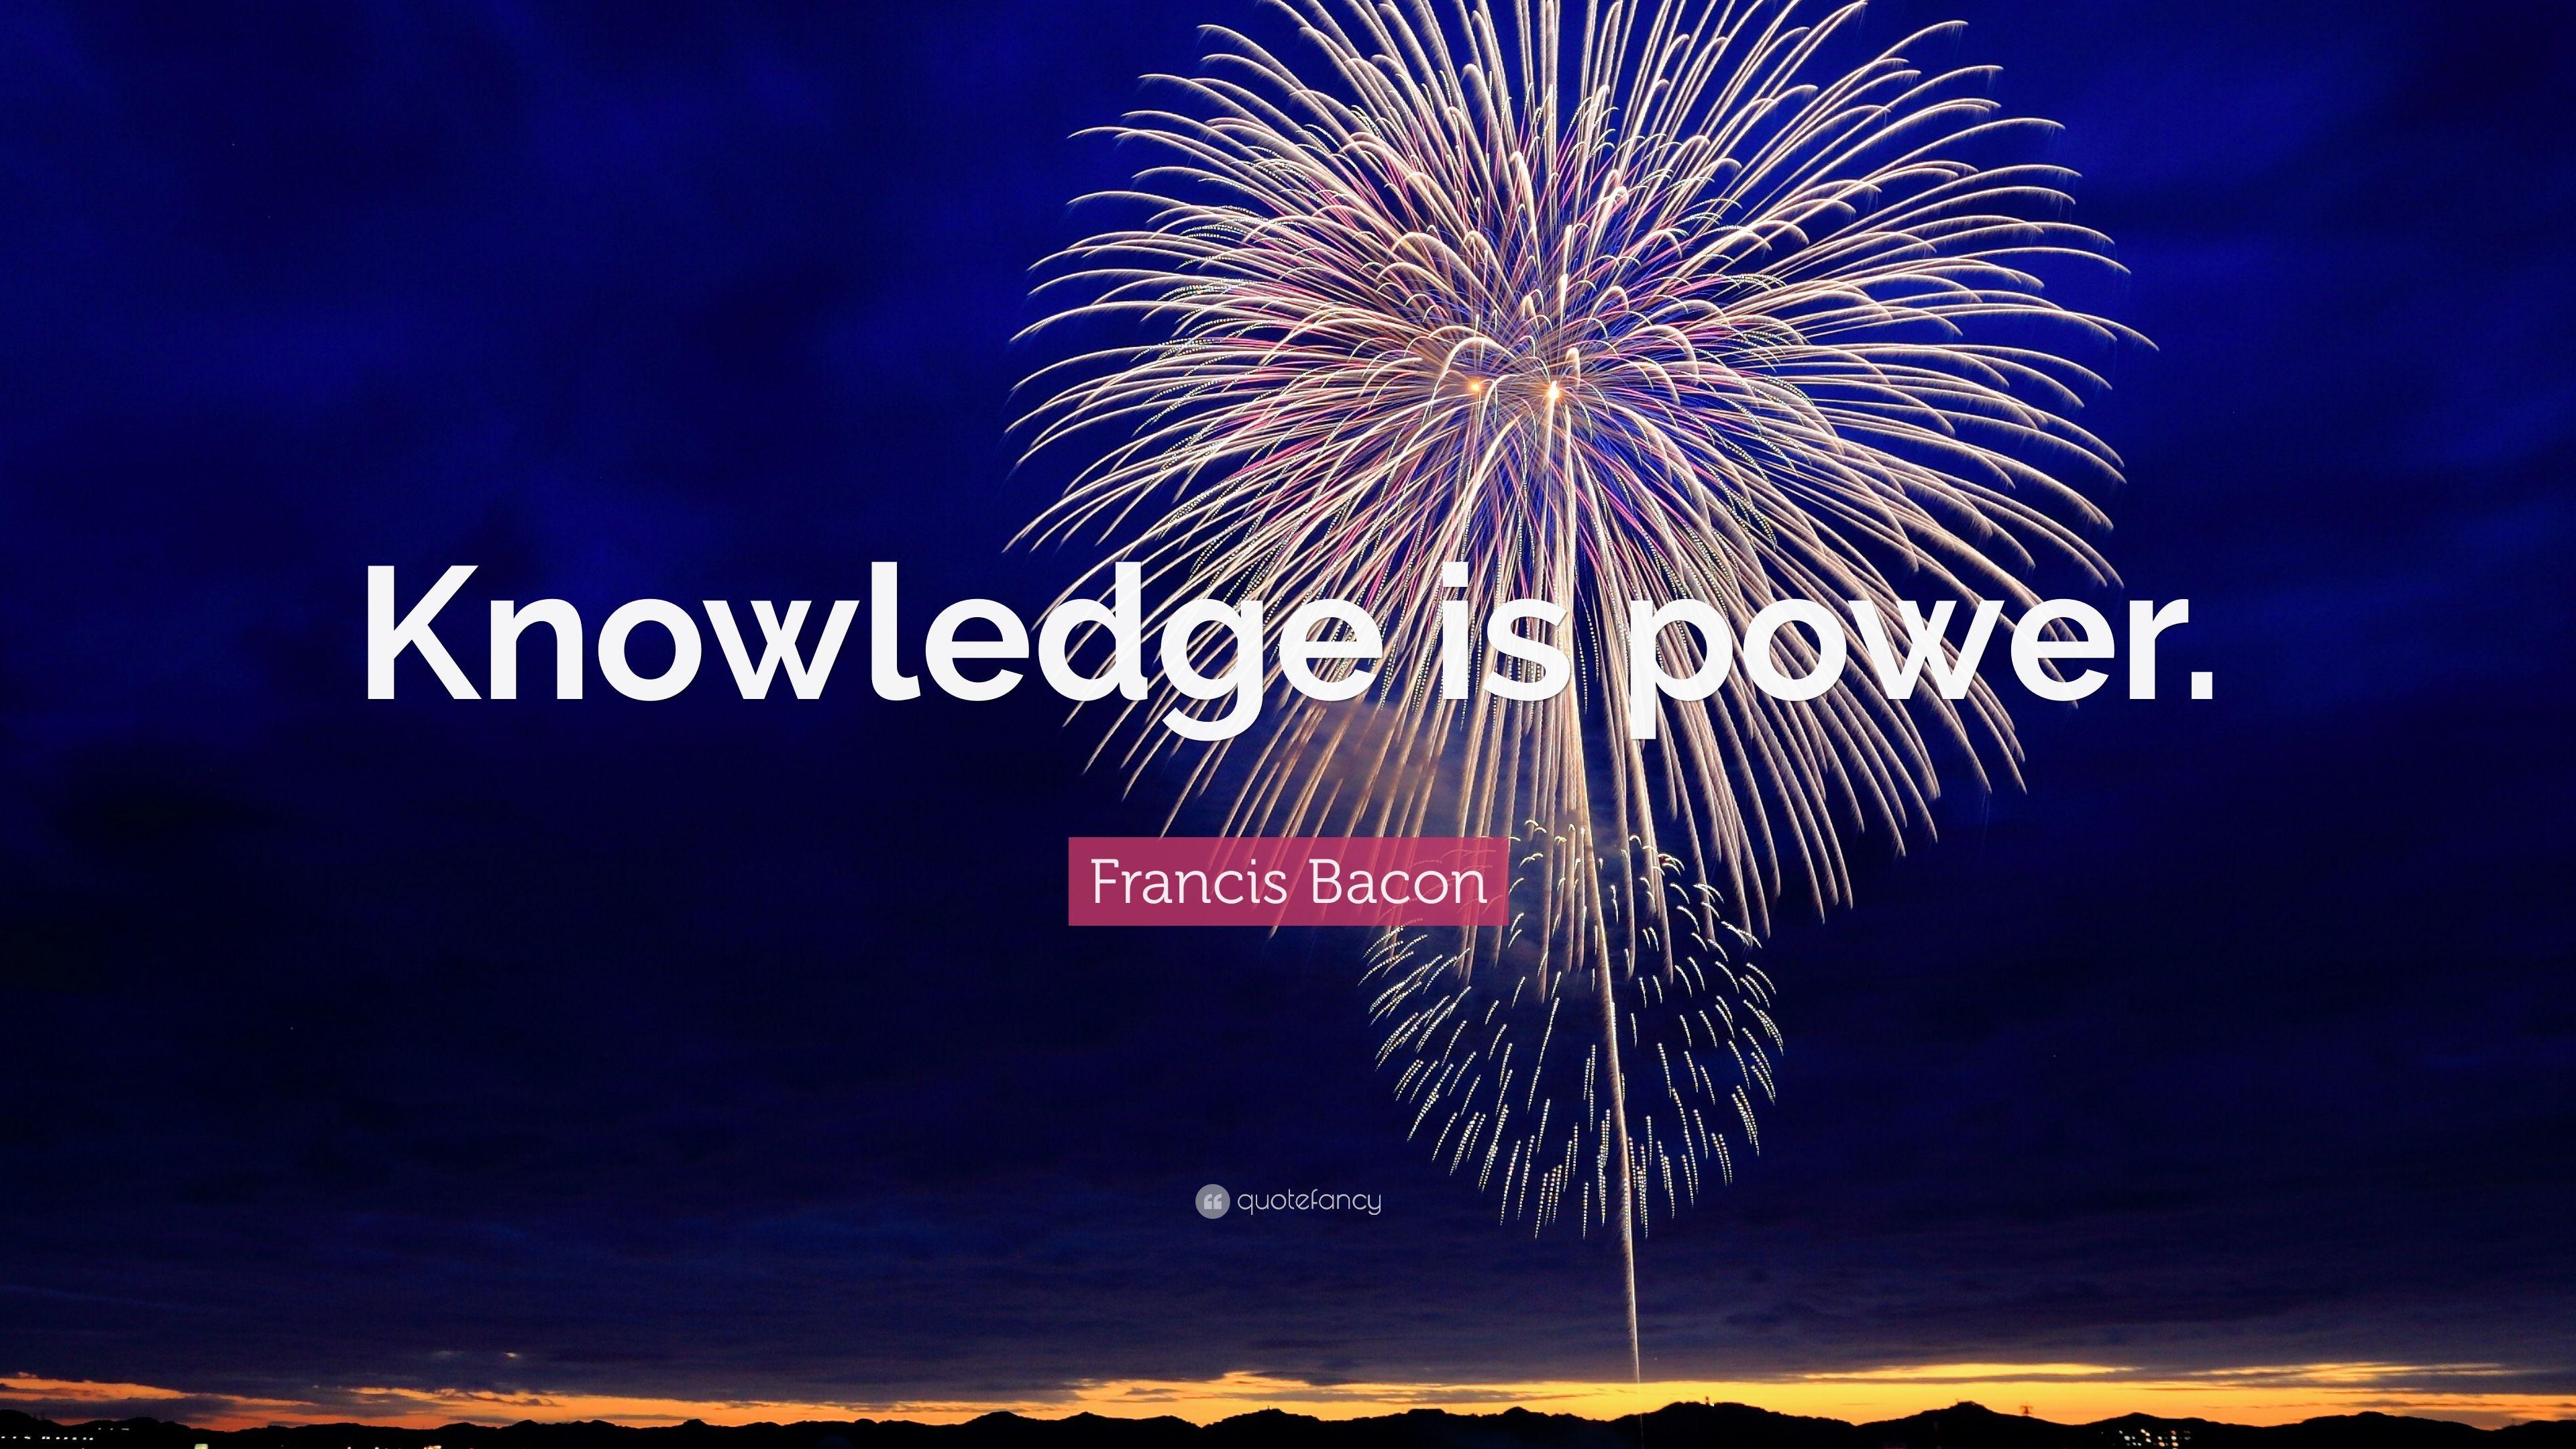 Francis Bacon Quote: “Knowledge is power.” 22 wallpaper